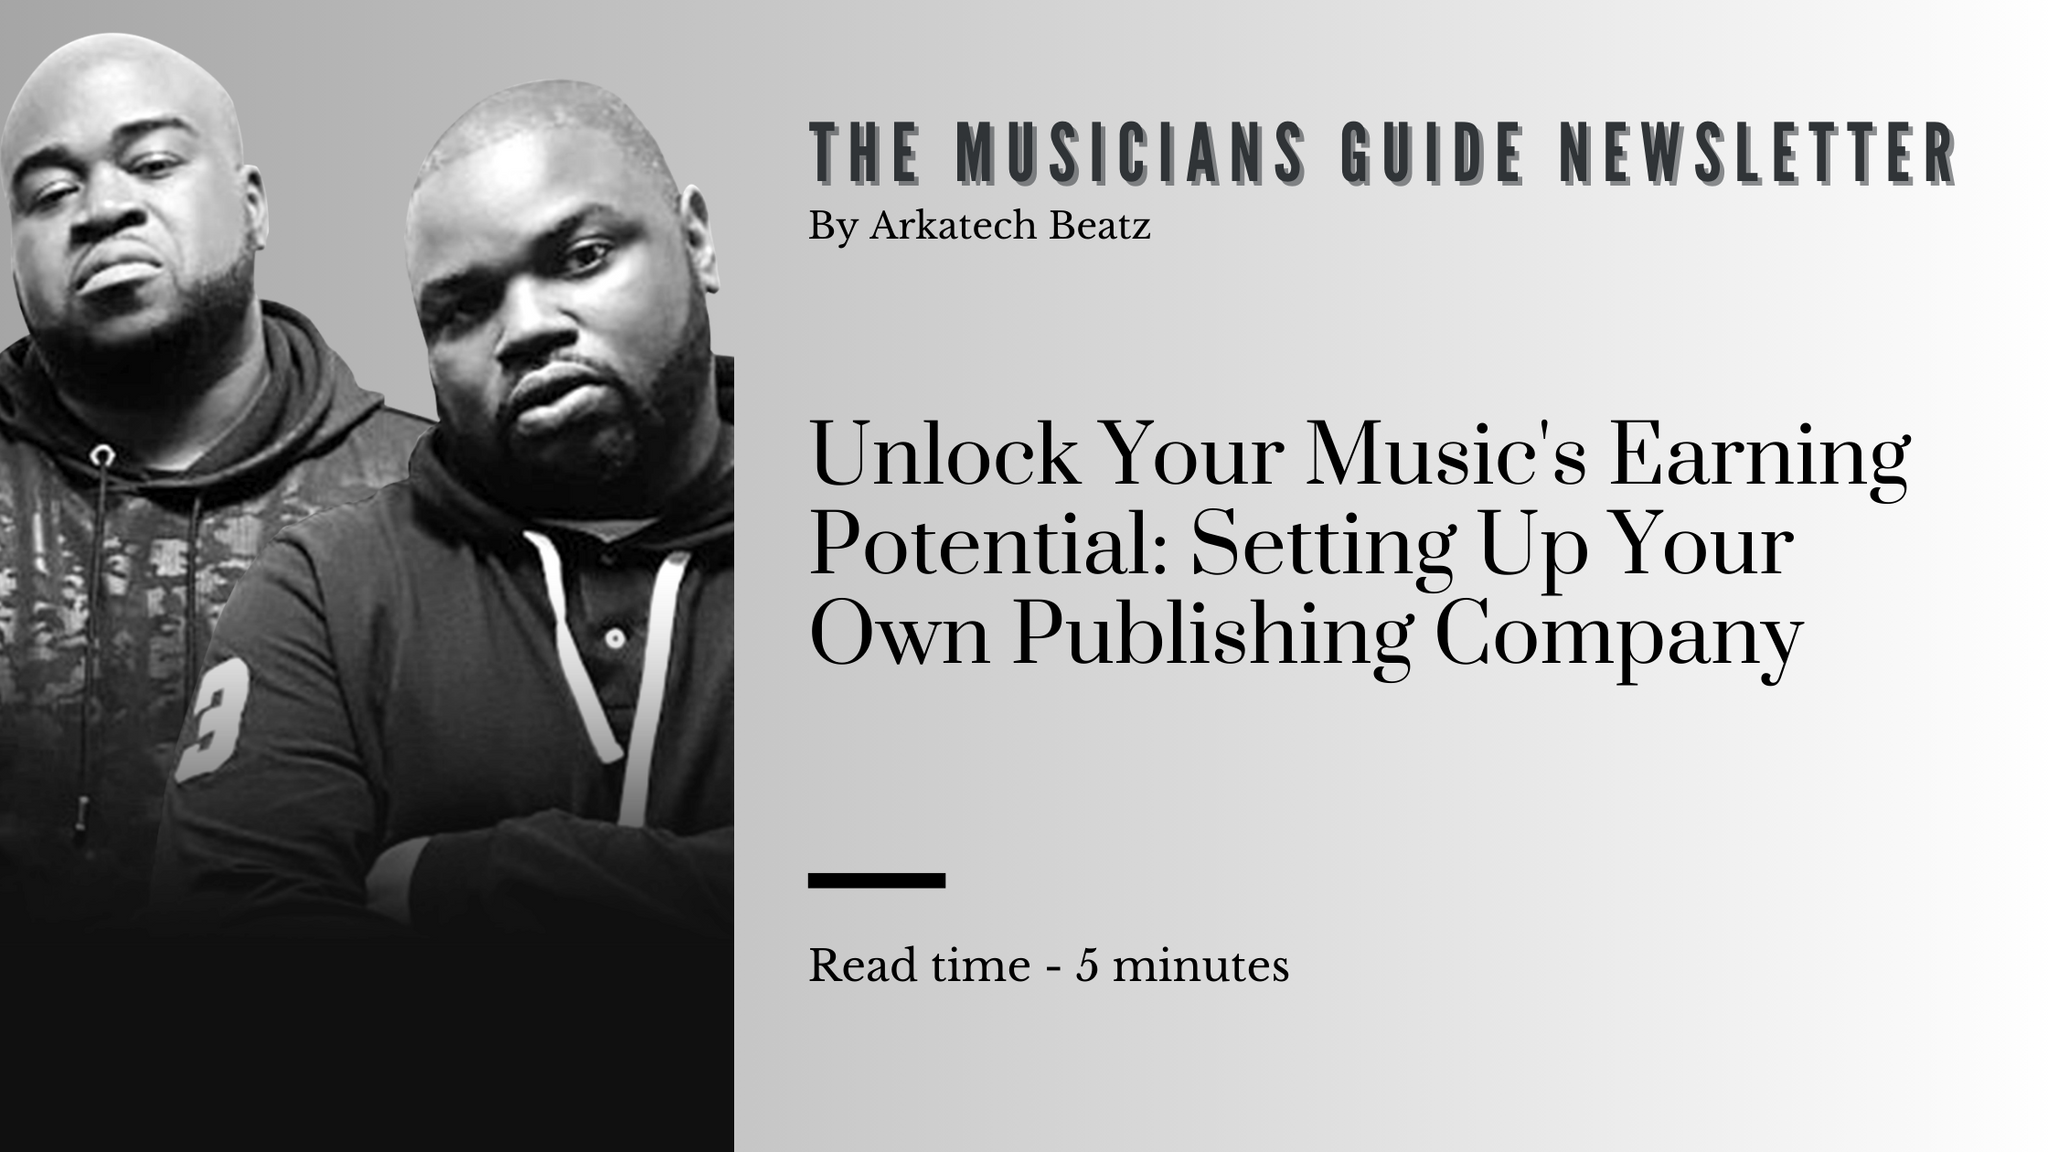 Unlock Your Music's Earning Potential: Setting Up Your Own Publishing Company